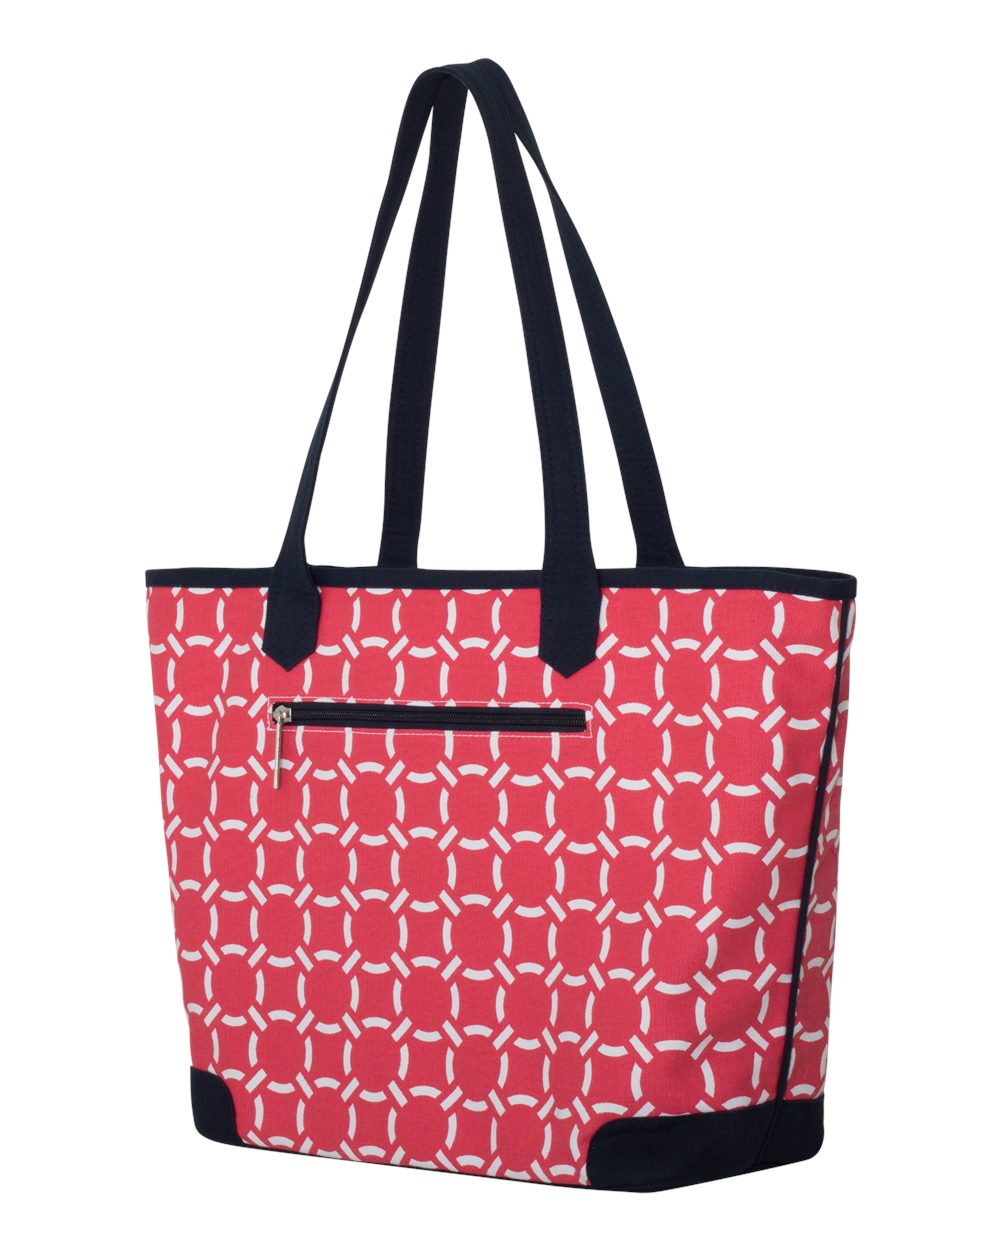 Ame & Lulu DAY100 - 25.5L Day Tote